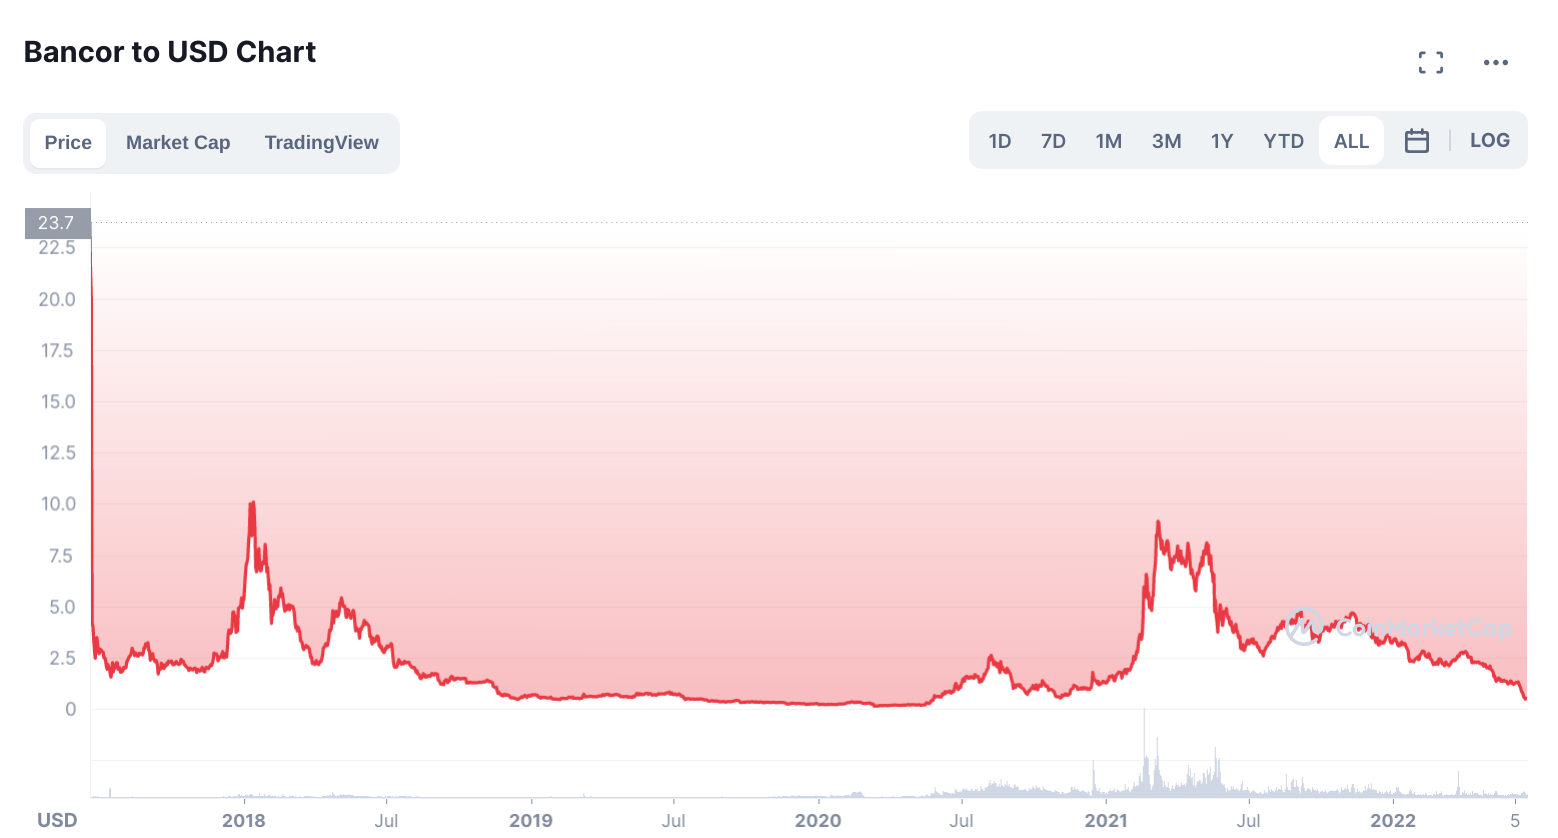 BNT chart in USD over the last 4 years - is bancor risky